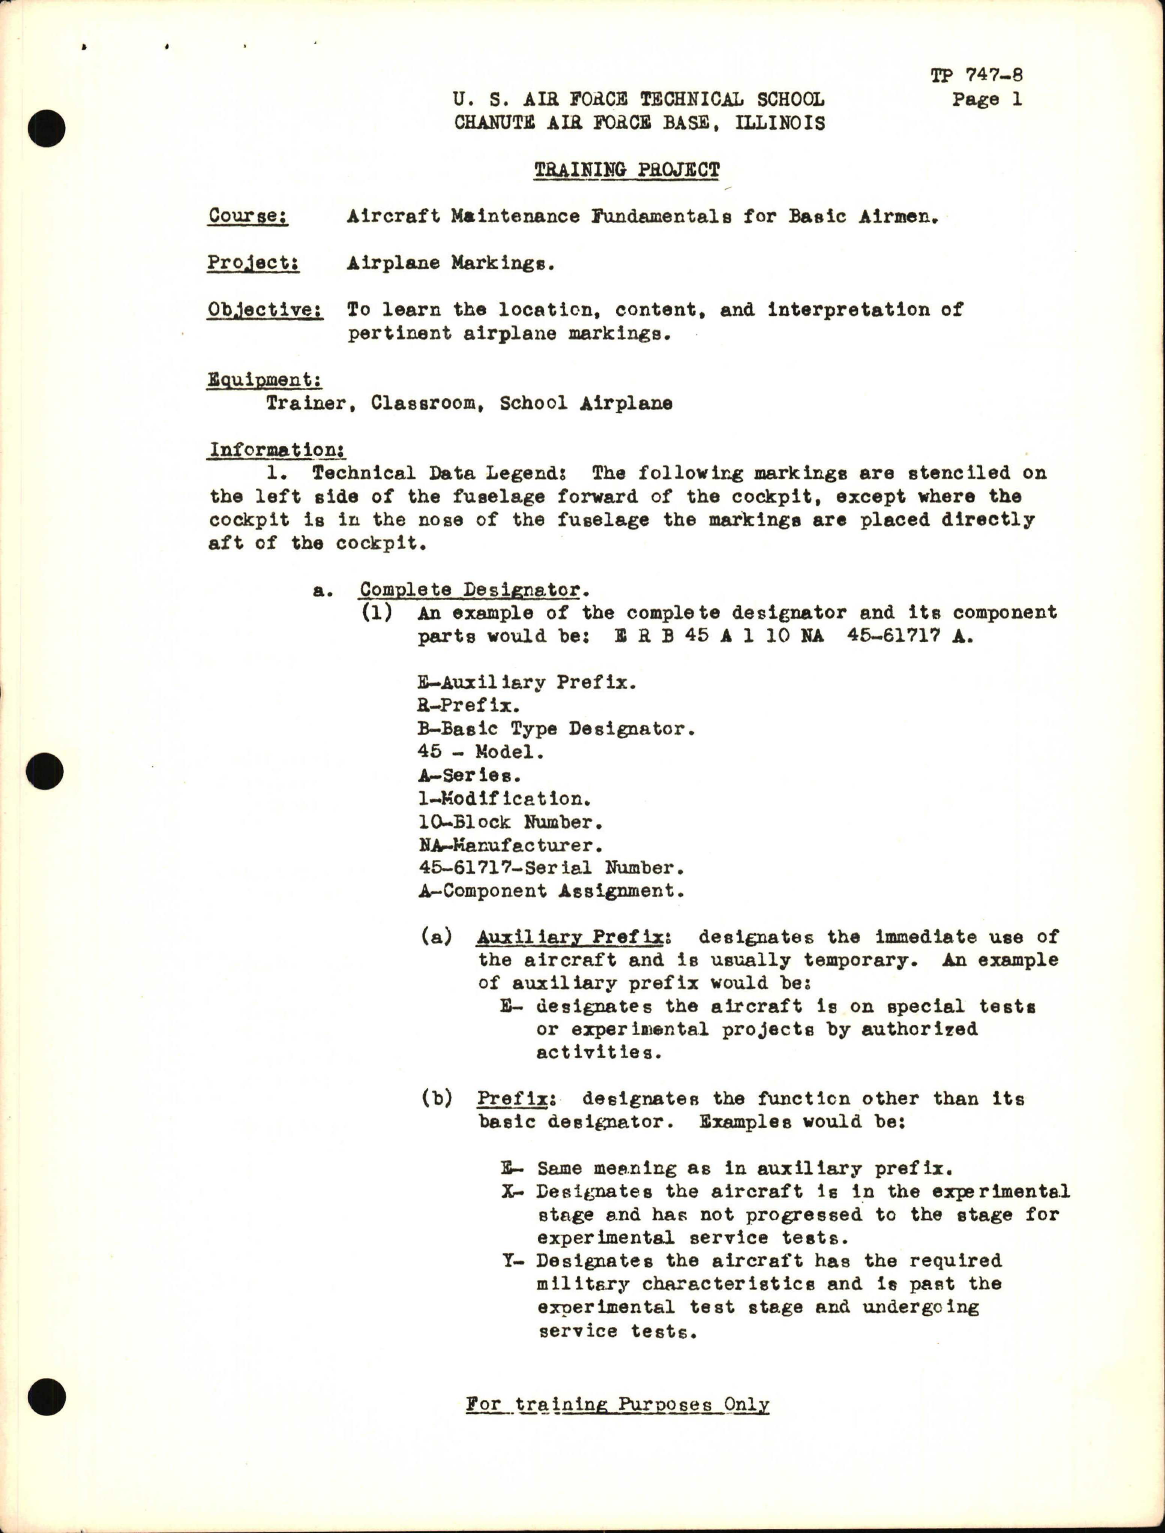 Sample page 1 from AirCorps Library document: Training Project, Airplane Markings